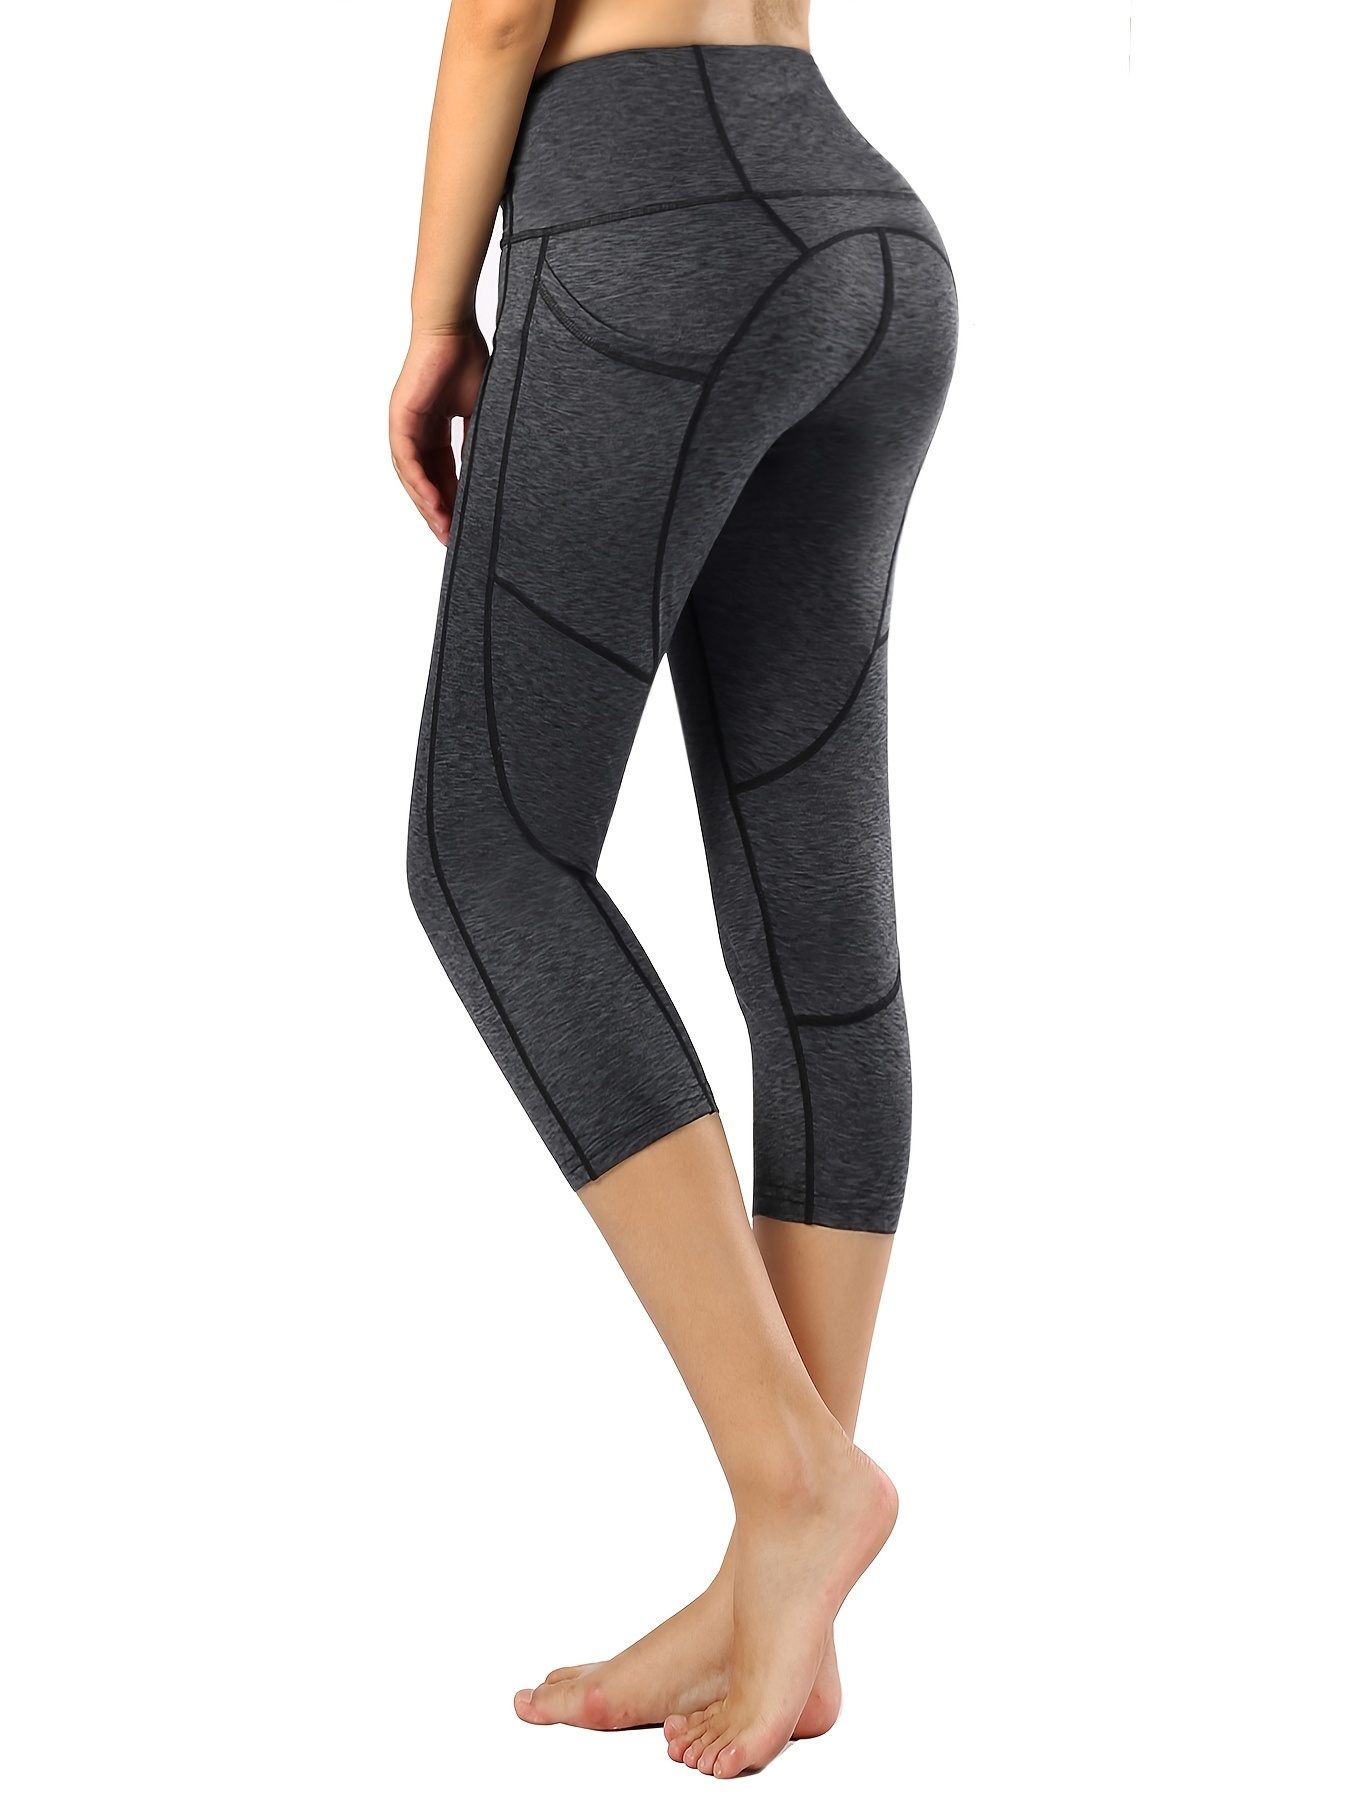 Women's Pants High Waisted Pants Knee Length Leggings Yoga Workout Exercise  Summer With Pockets 